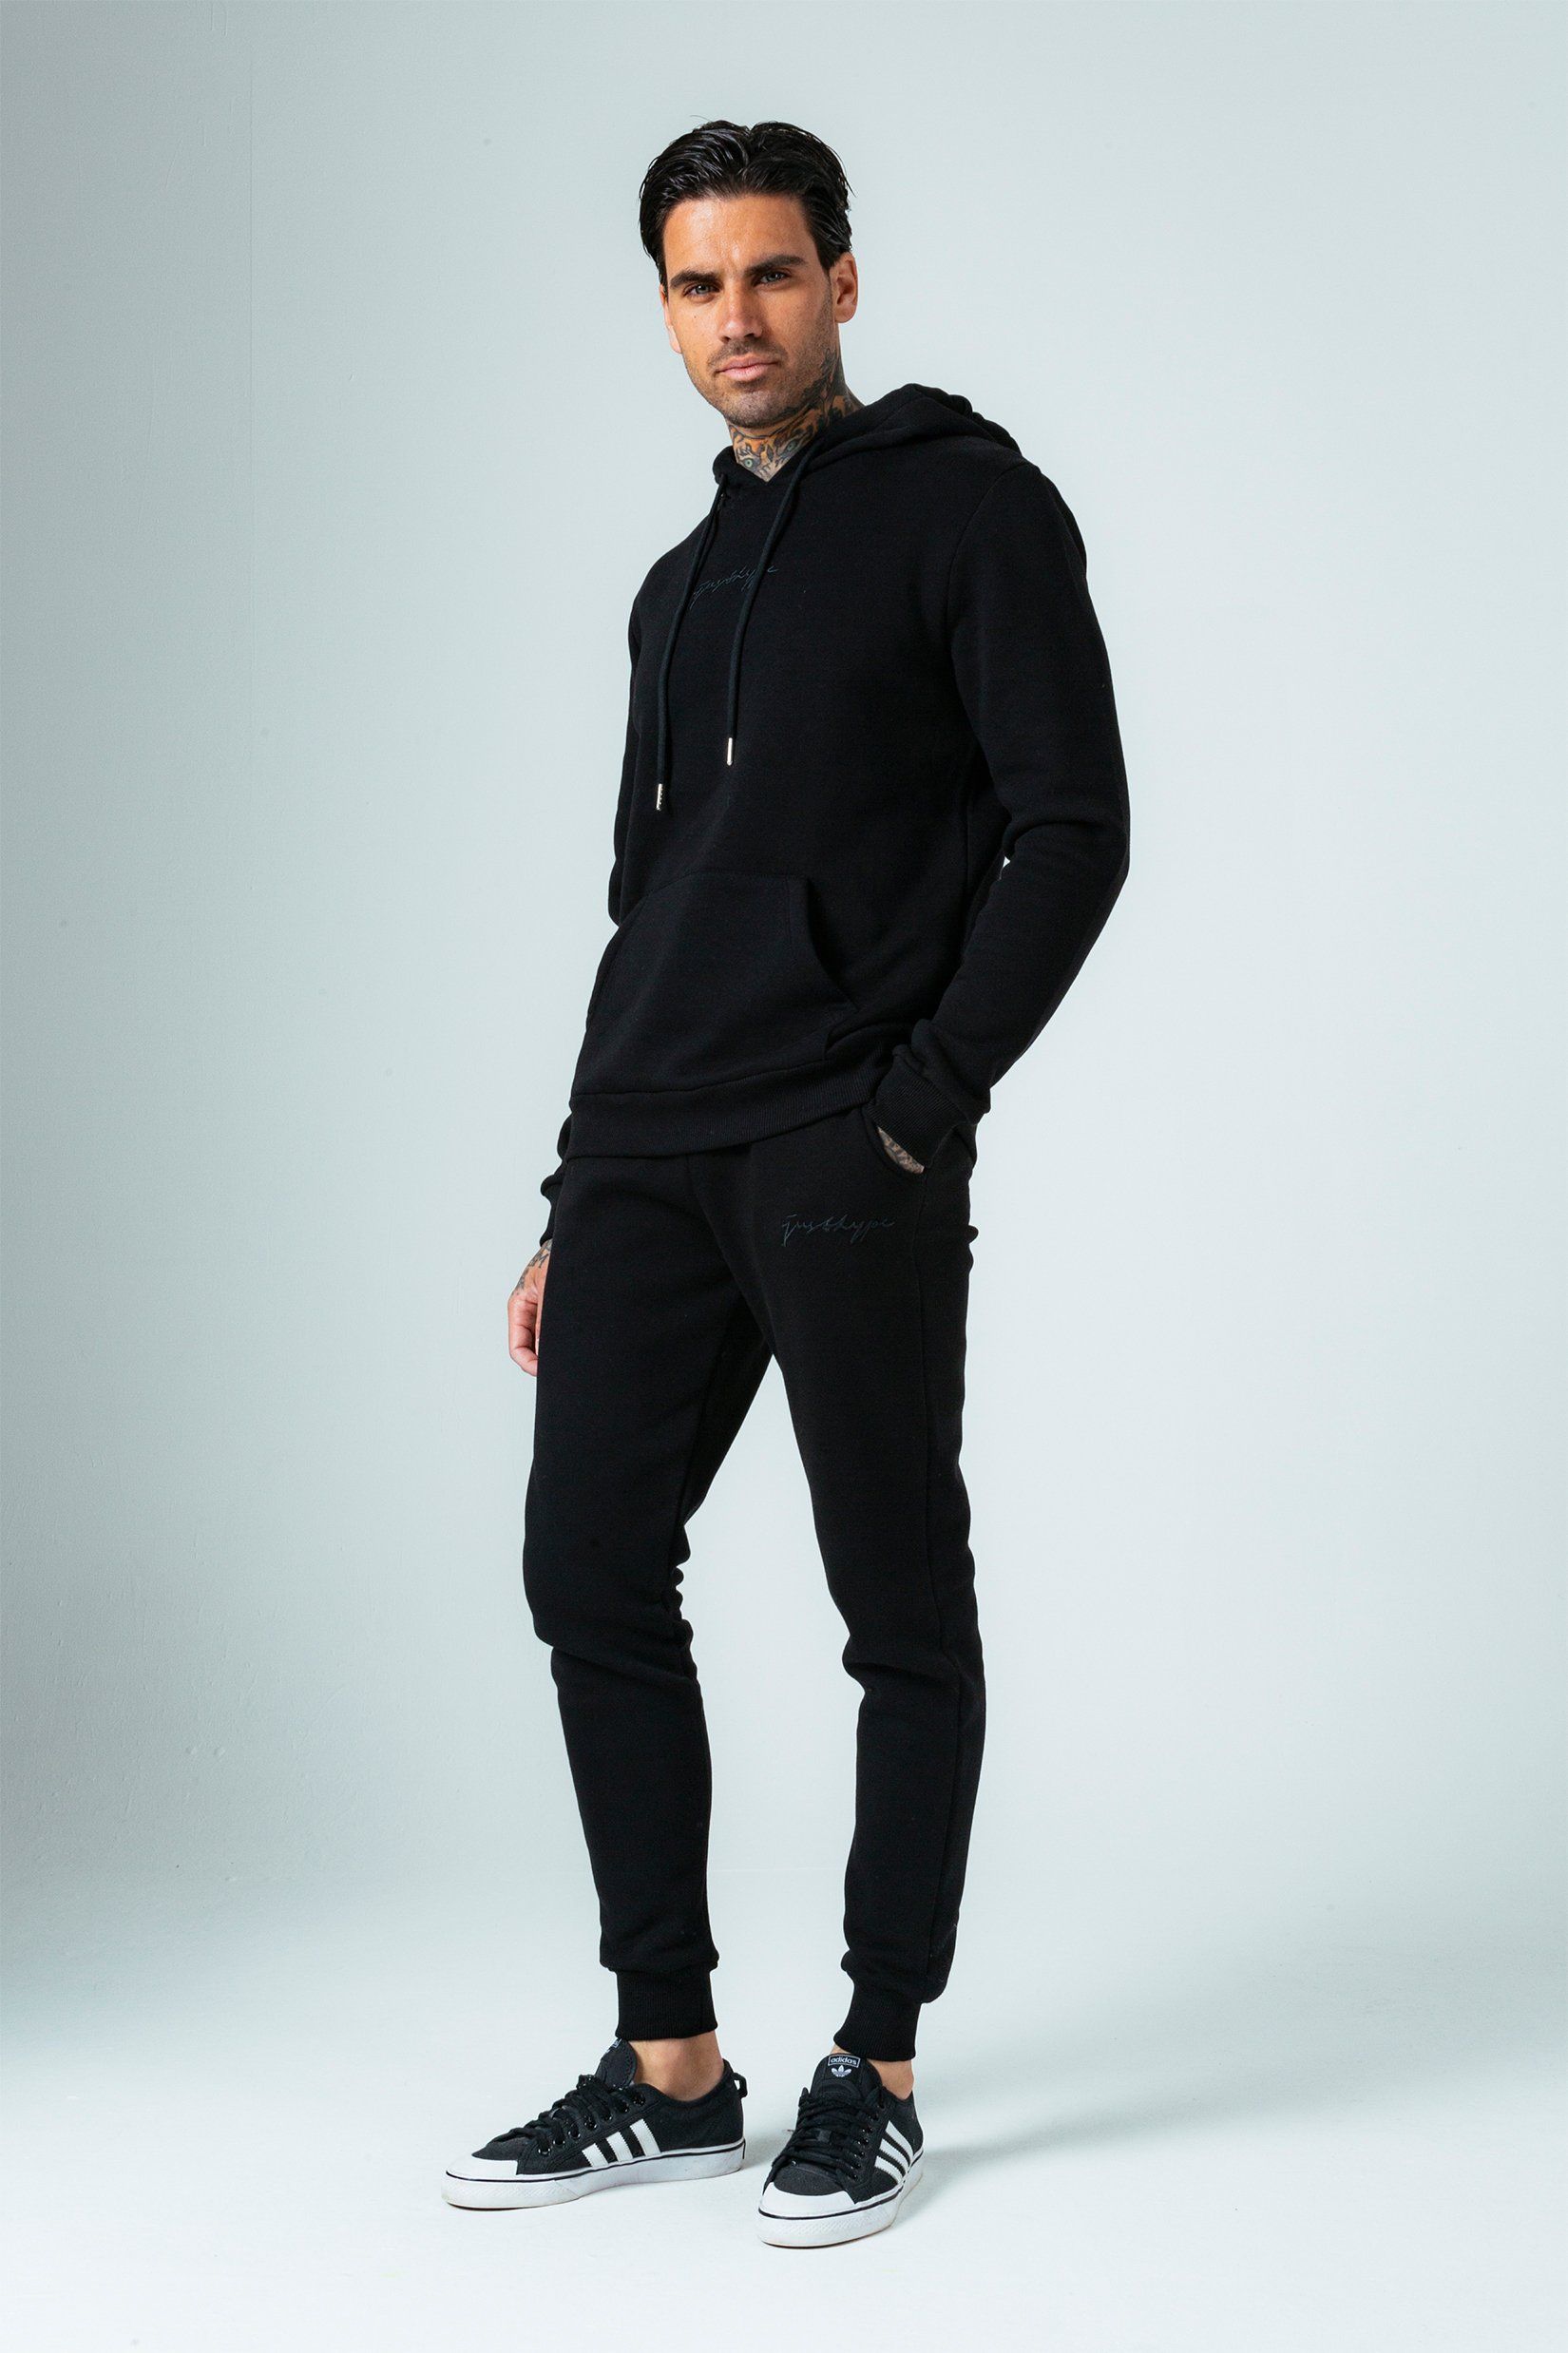 Introducing the freshest loungewear set you've ever seen! The Hype Black With Black Signature Script Men'S Hoodie & Jogger Set is your new go-to loungewear set when you need that extra comfort boost. Designed in 80% Cotton 20% Polyester for the ultimate soft touch feeling! The Hoodie features a fixed hood, kangaroo pocket, fitted hem and cuffs, finished with drawstring pullers and embossed justhype embroidery across the front in the same colour. The Joggers highlight an elasticated waistband, fitted cuffs and double pockets with tonal drawstring pullers and embossed justhype embroidery on the side of the leg. Wear together or stand alone with a pair of box fresh kicks. Machine washable. 